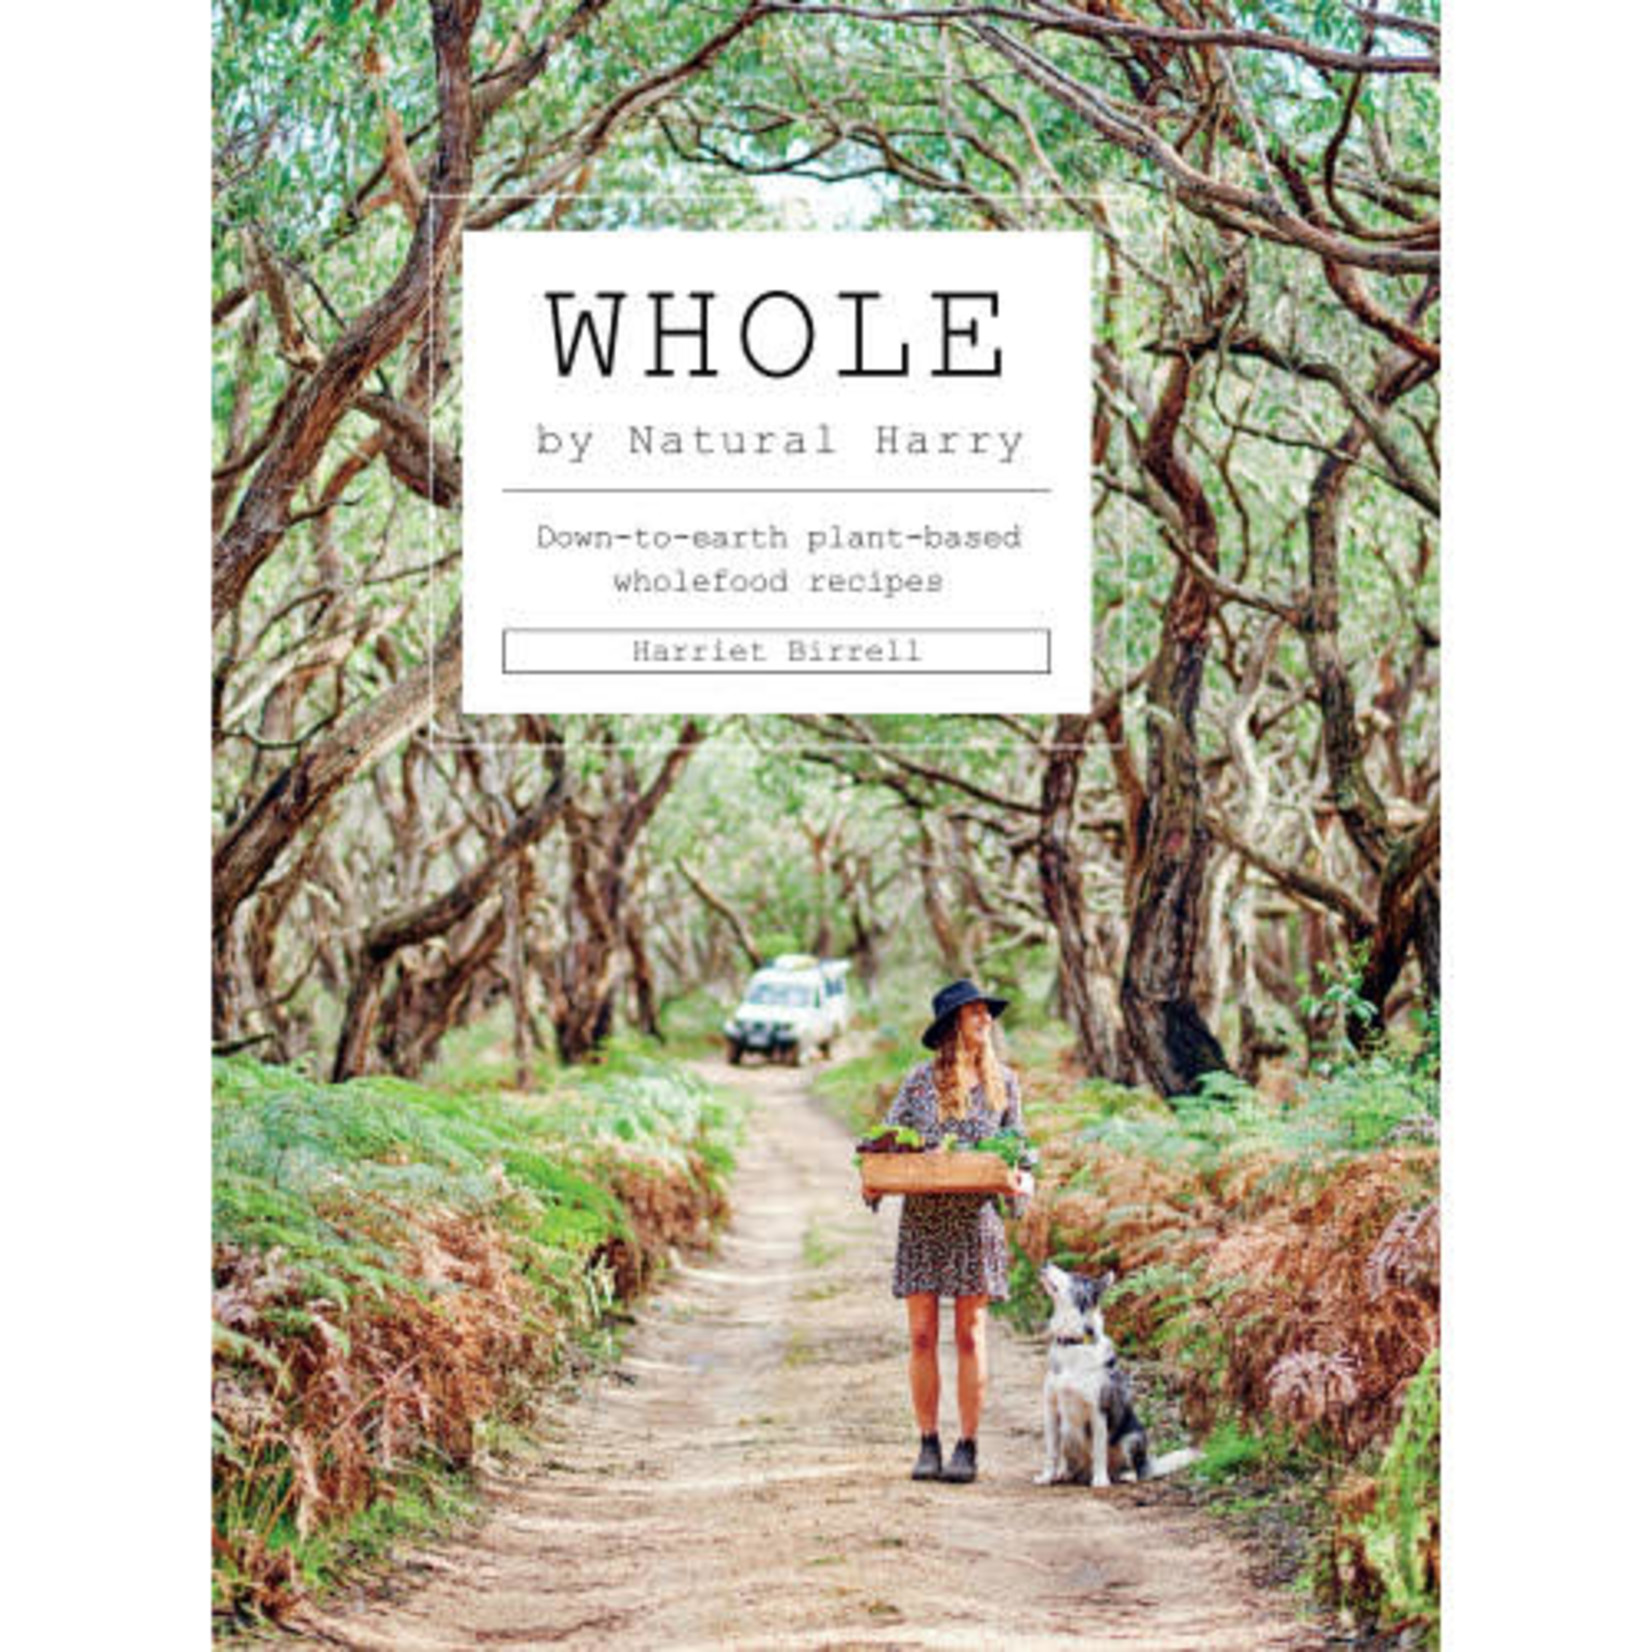 Whole: Down-to-Earth Plant-Based Wholefood Recipes